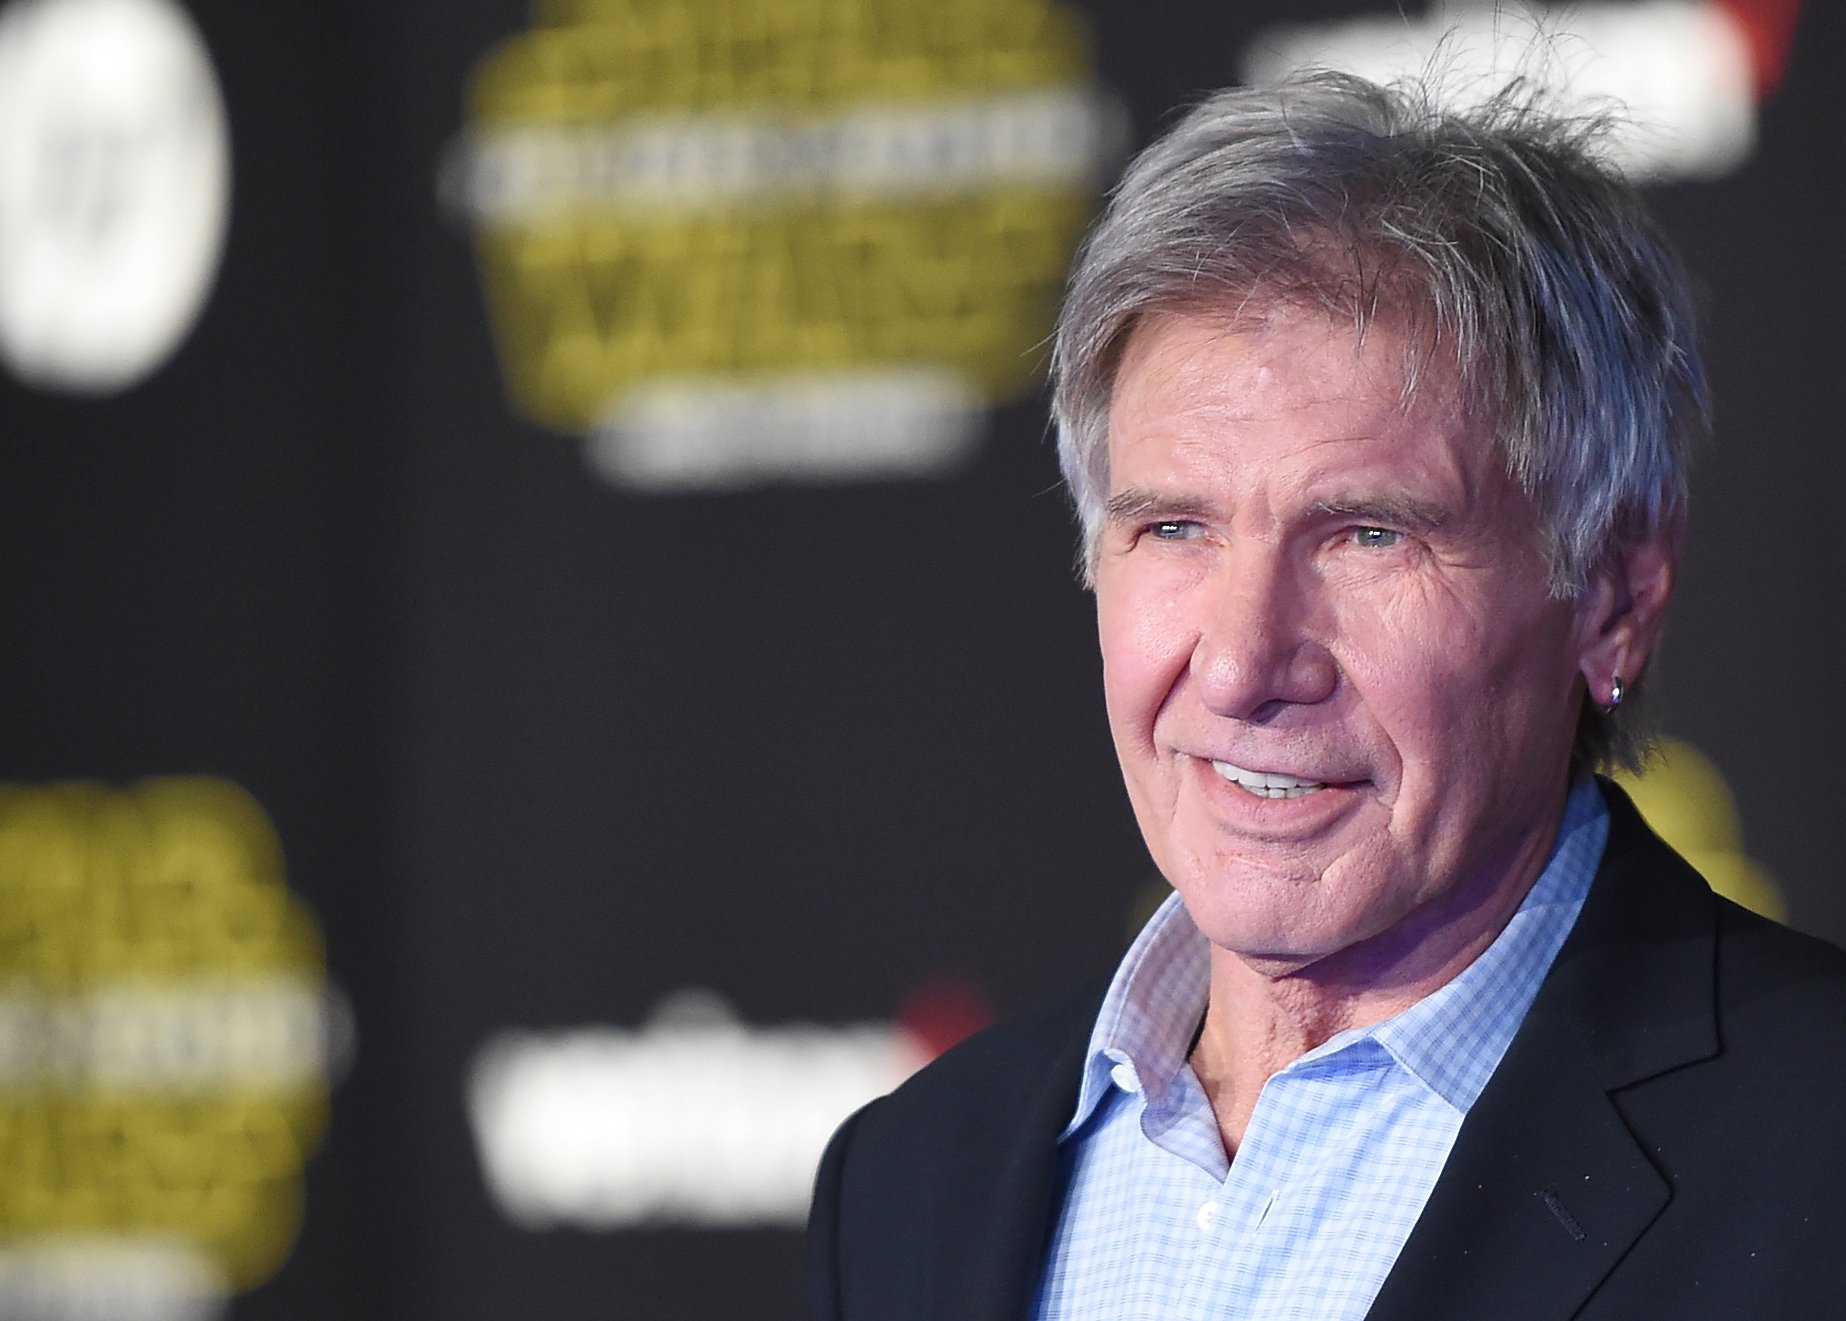 ‘Star Wars’: Harrison Ford Only Made $10,000 for Starring in ‘A New Hope’